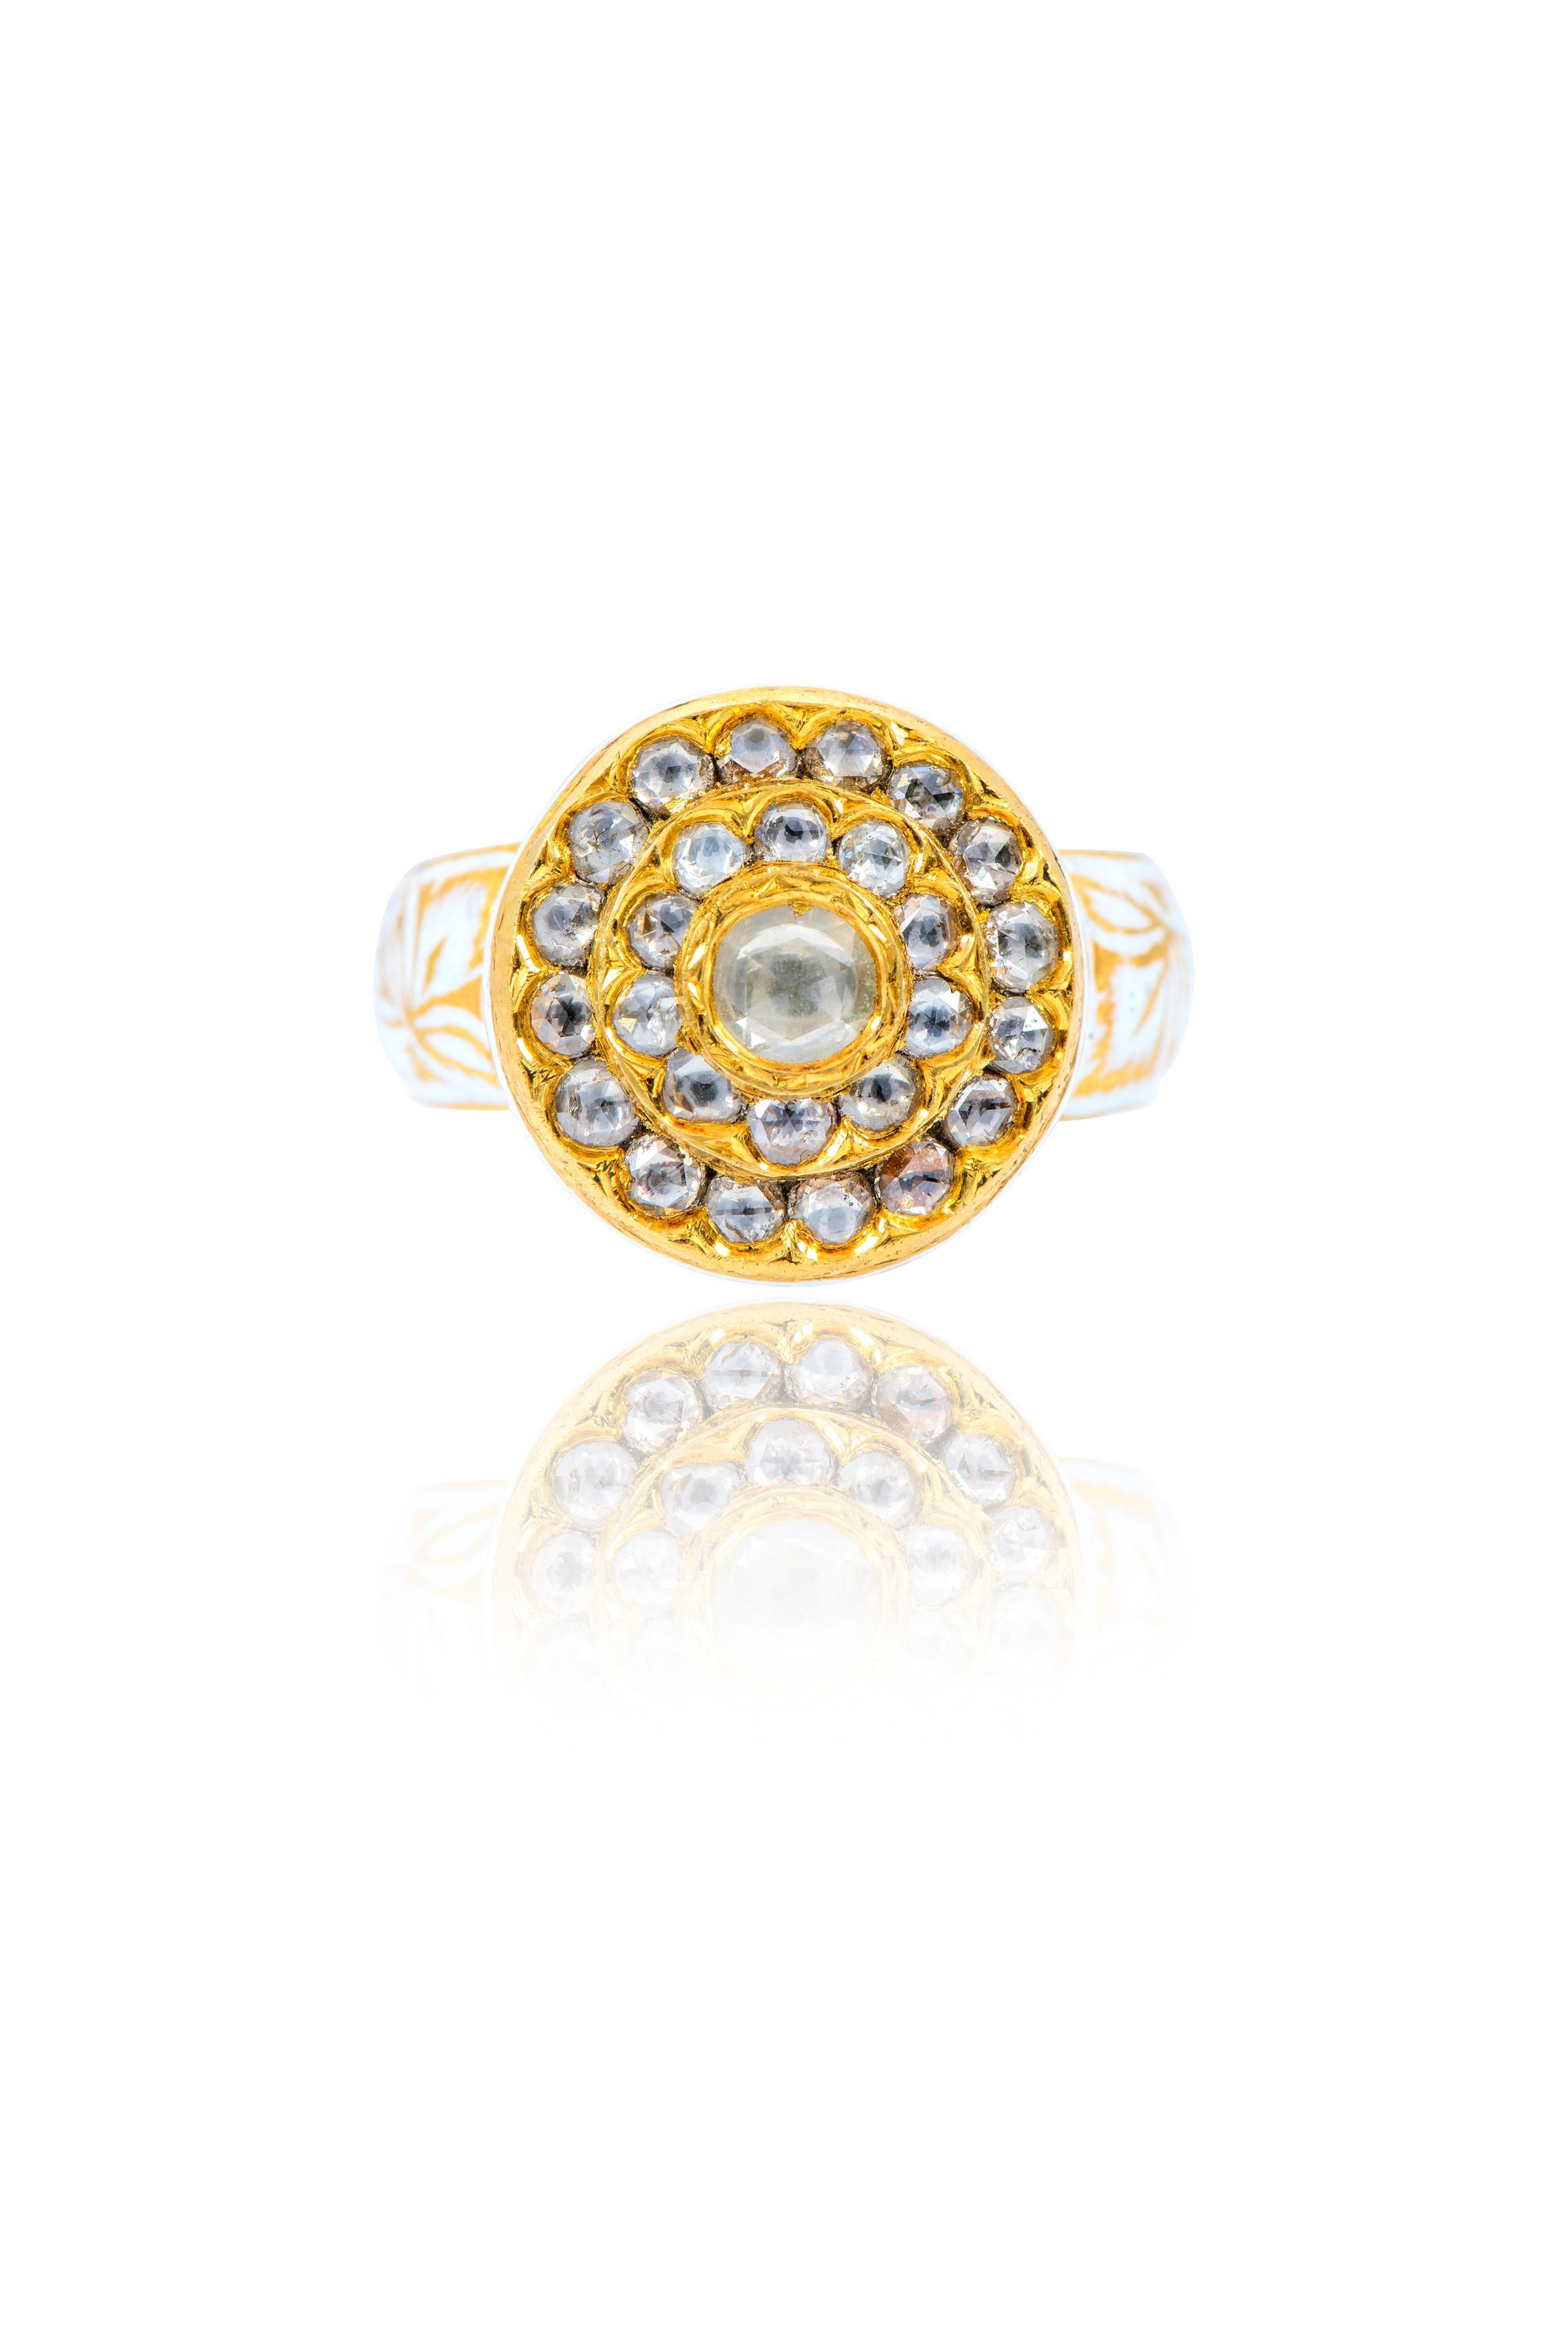 Anglo-Indian 22 Karat Gold Rose-Cut Diamond Ring Handcrafted with White Enamel Work  For Sale